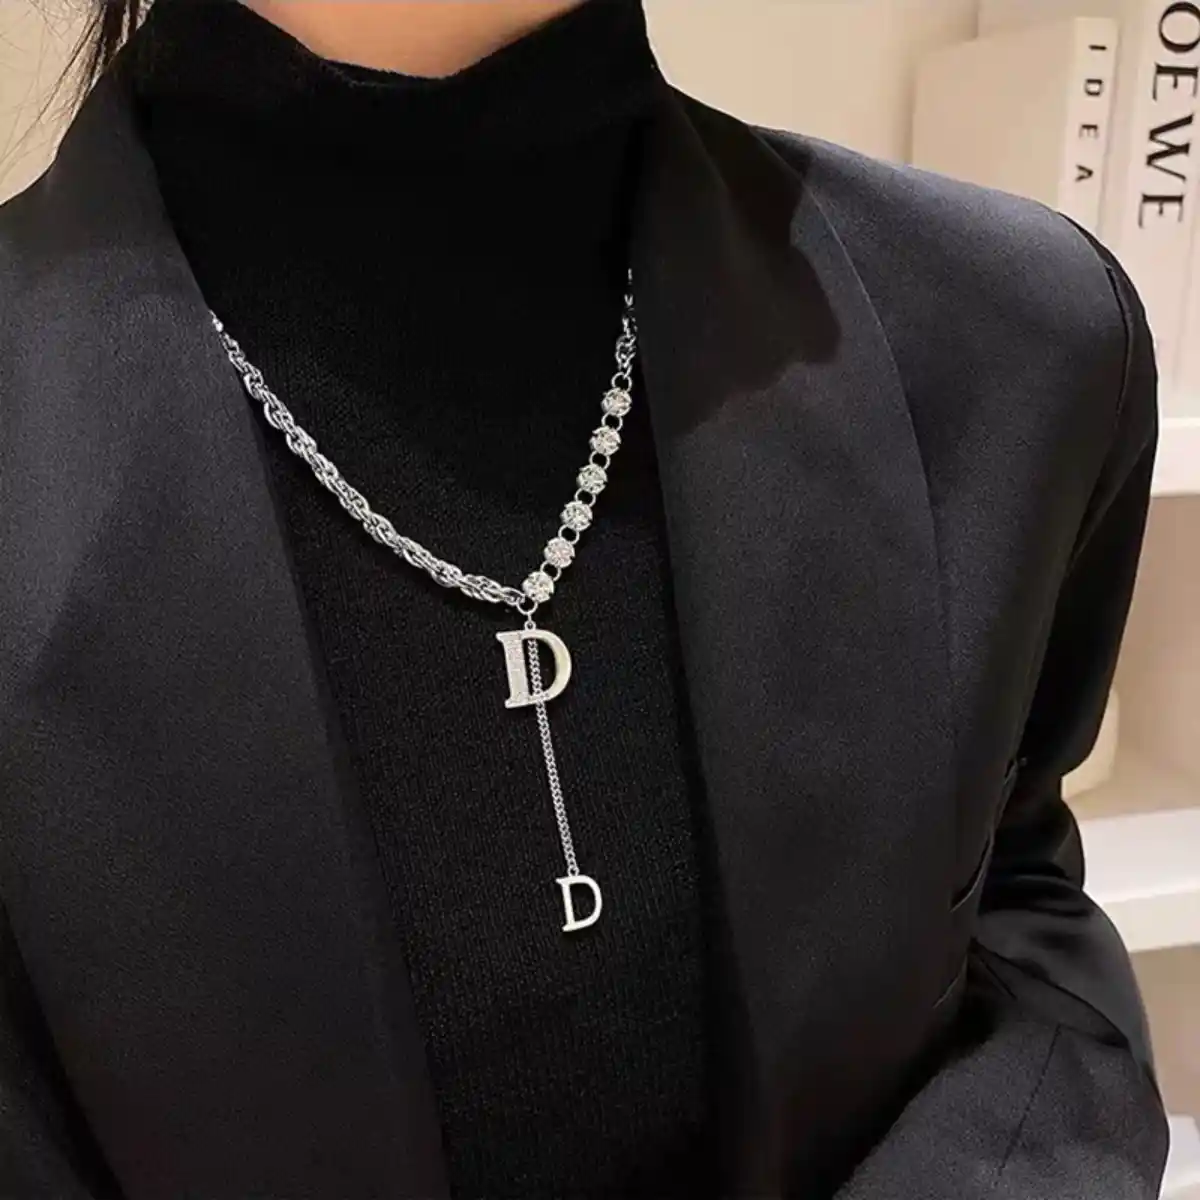 Dior necklace dupe